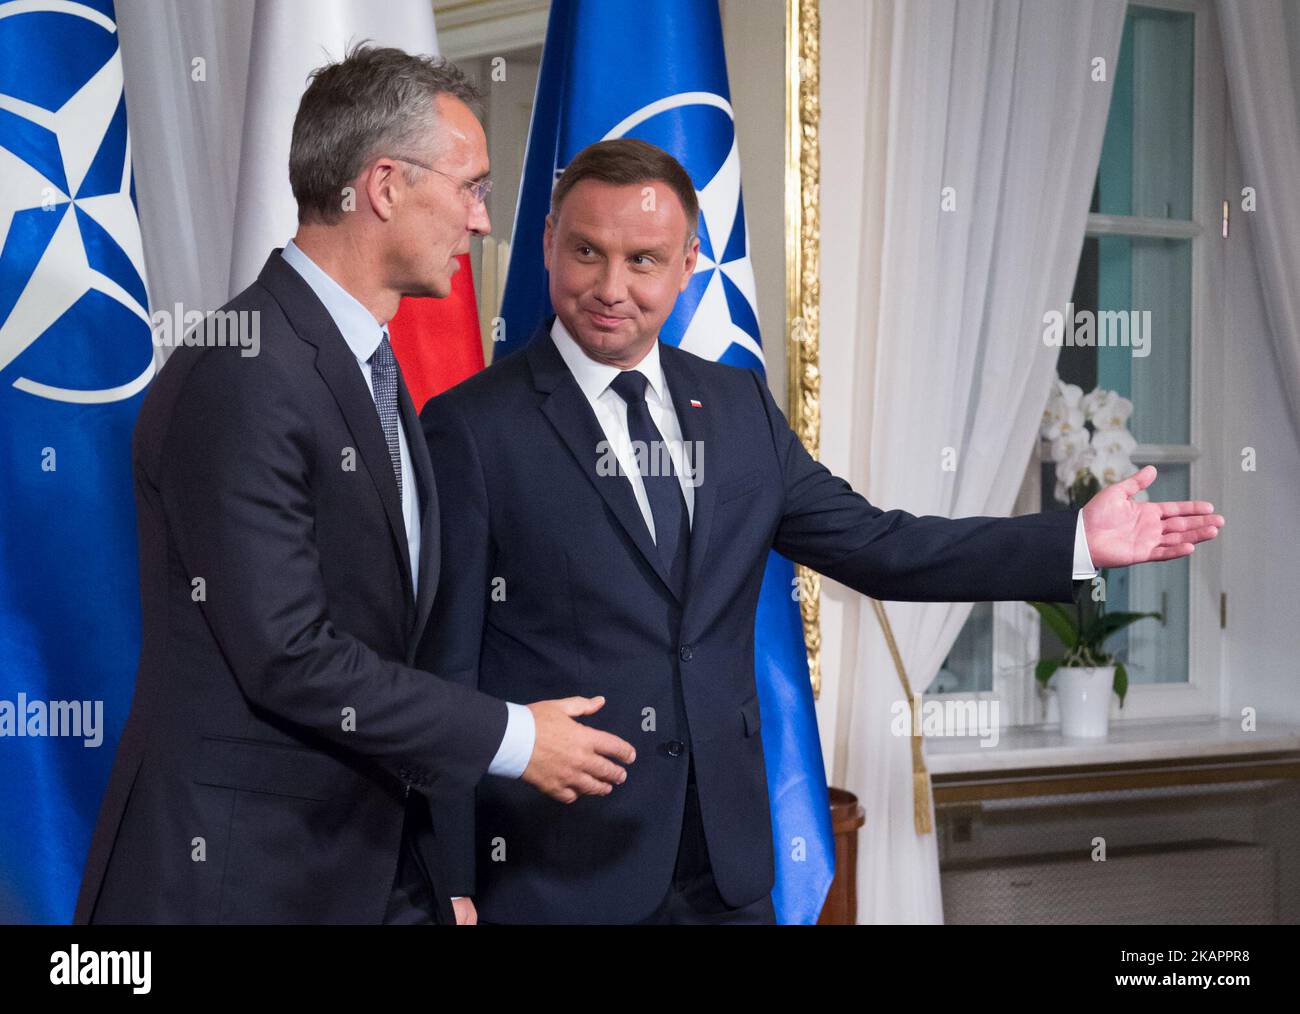 NATO Secretary General Jens Stoltenberg and President of Poland Andrzej Duda during a welcome ceremony before their meeting at Belweder Palace in Warsaw, Poland on 24 August 2017 (Photo by Mateusz Wlodarczyk/NurPhoto) Stock Photo